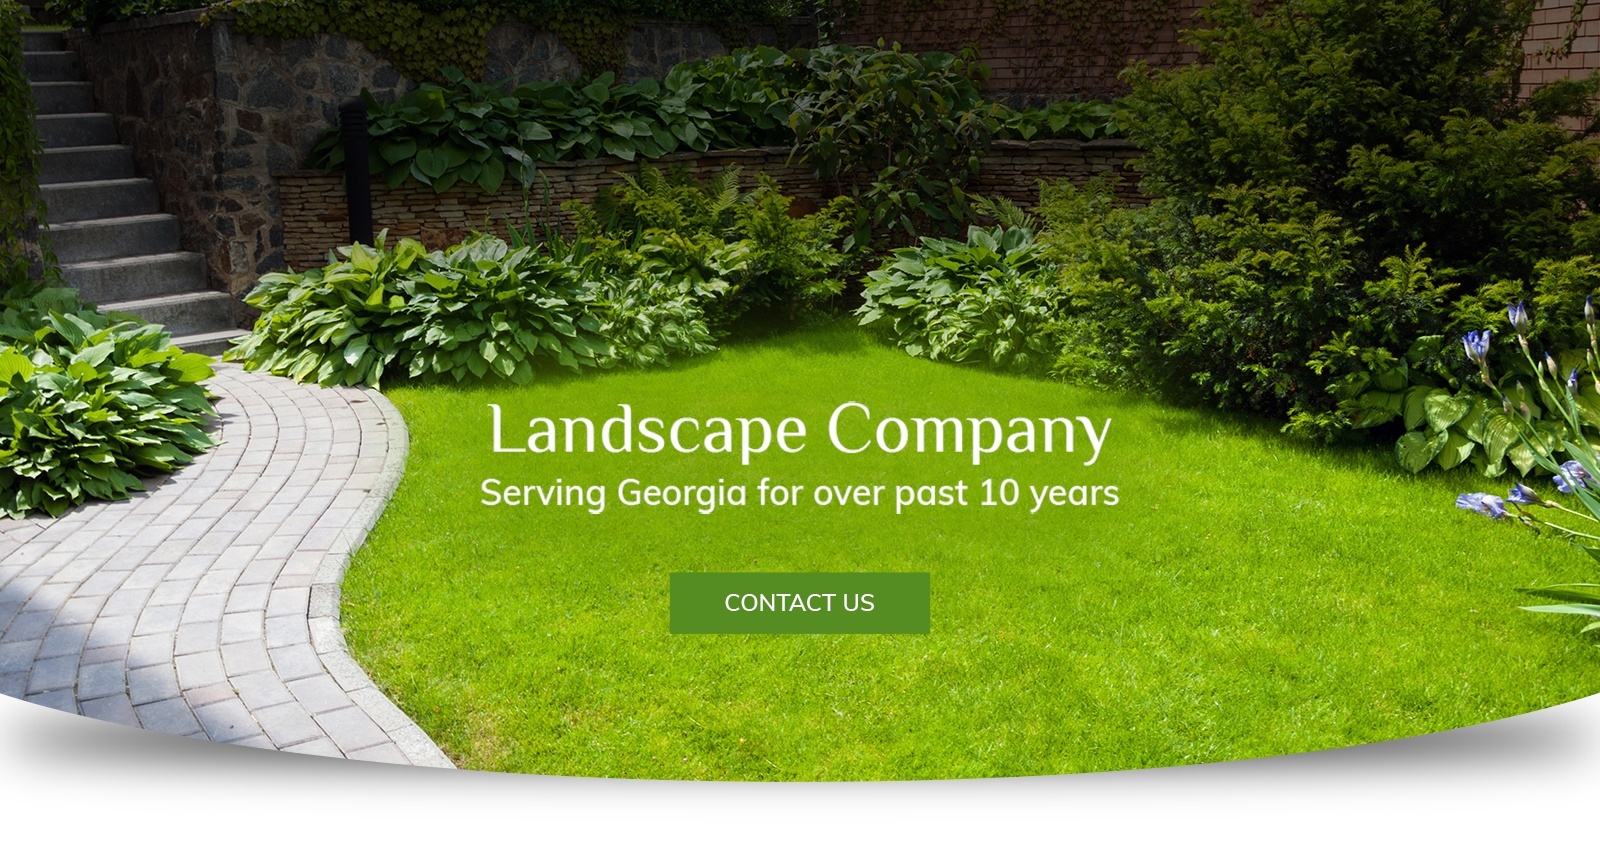 Landscaping Lawn Maintenance Services, Landscaping Companies In Atlanta Georgia